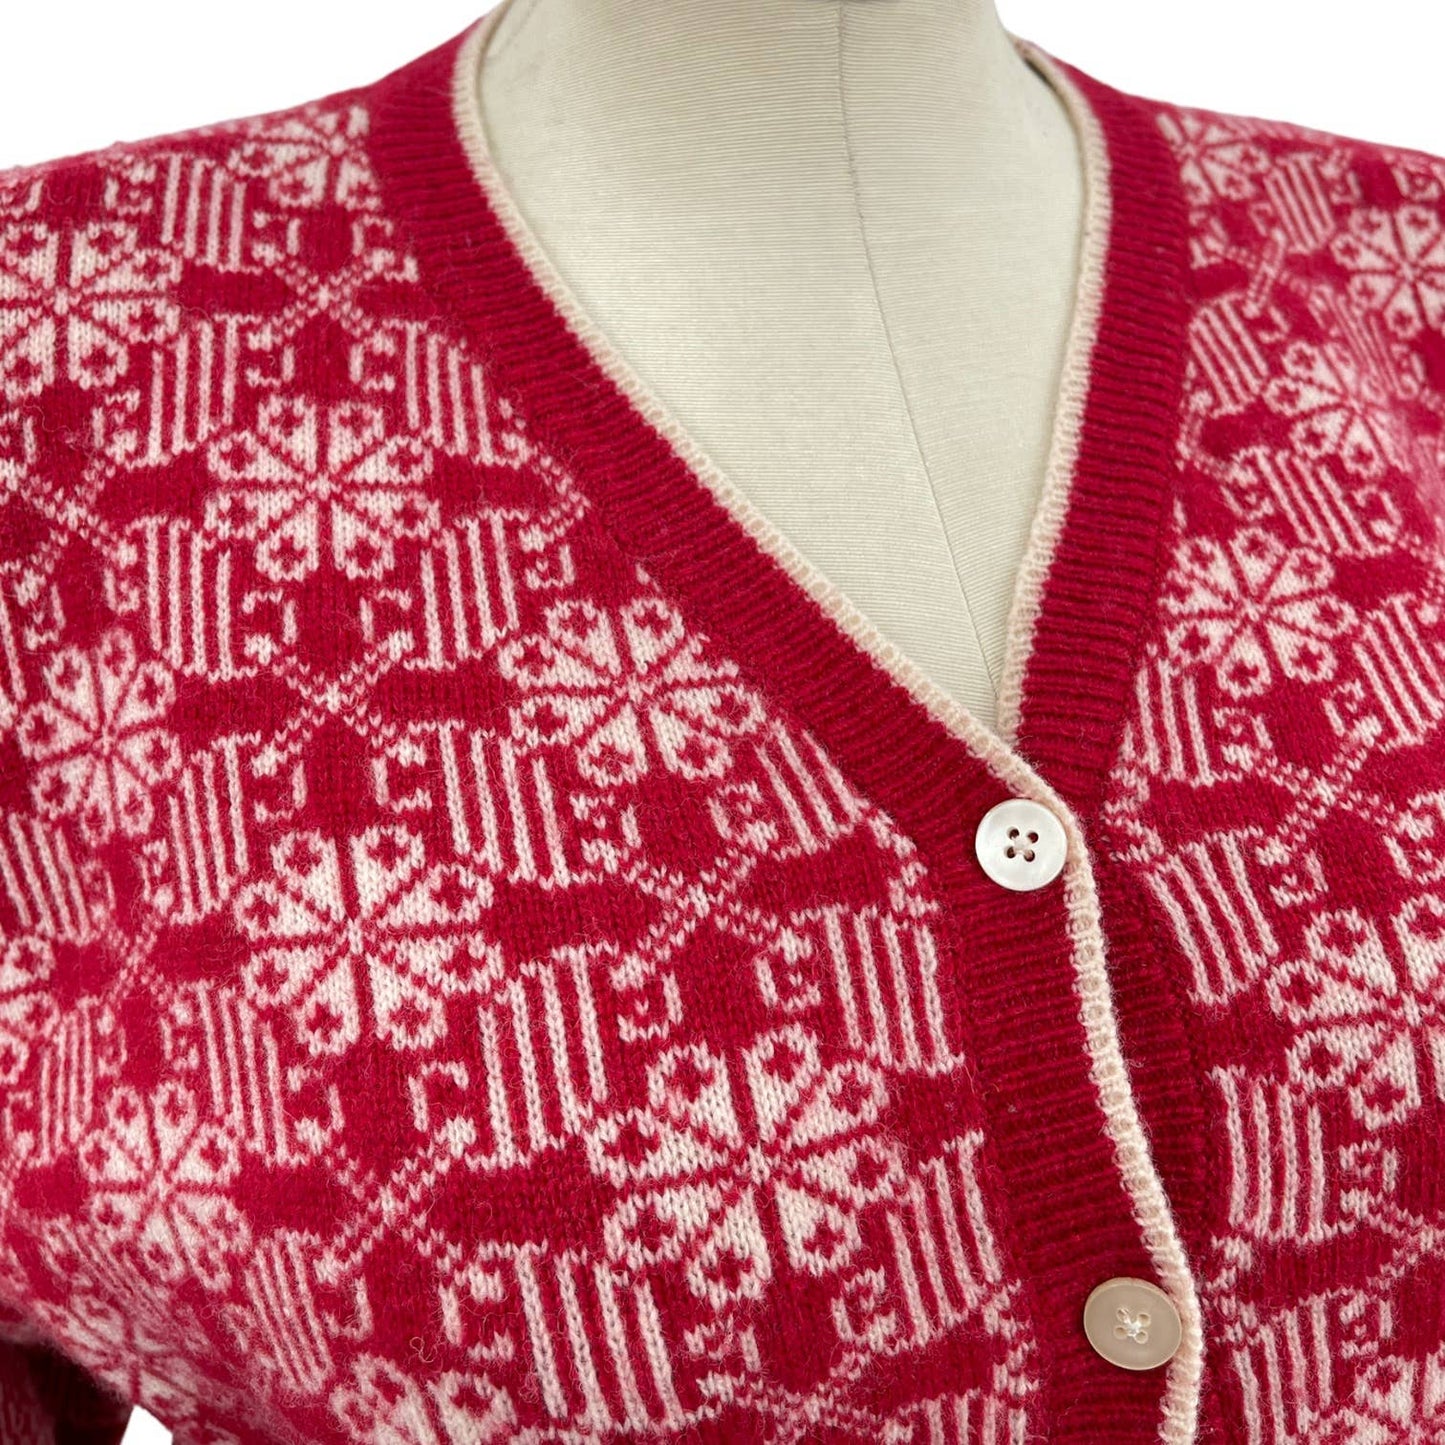 Vintage 90s Red and Cream Lambswool Cardigan Sweater Winter Gap Size L